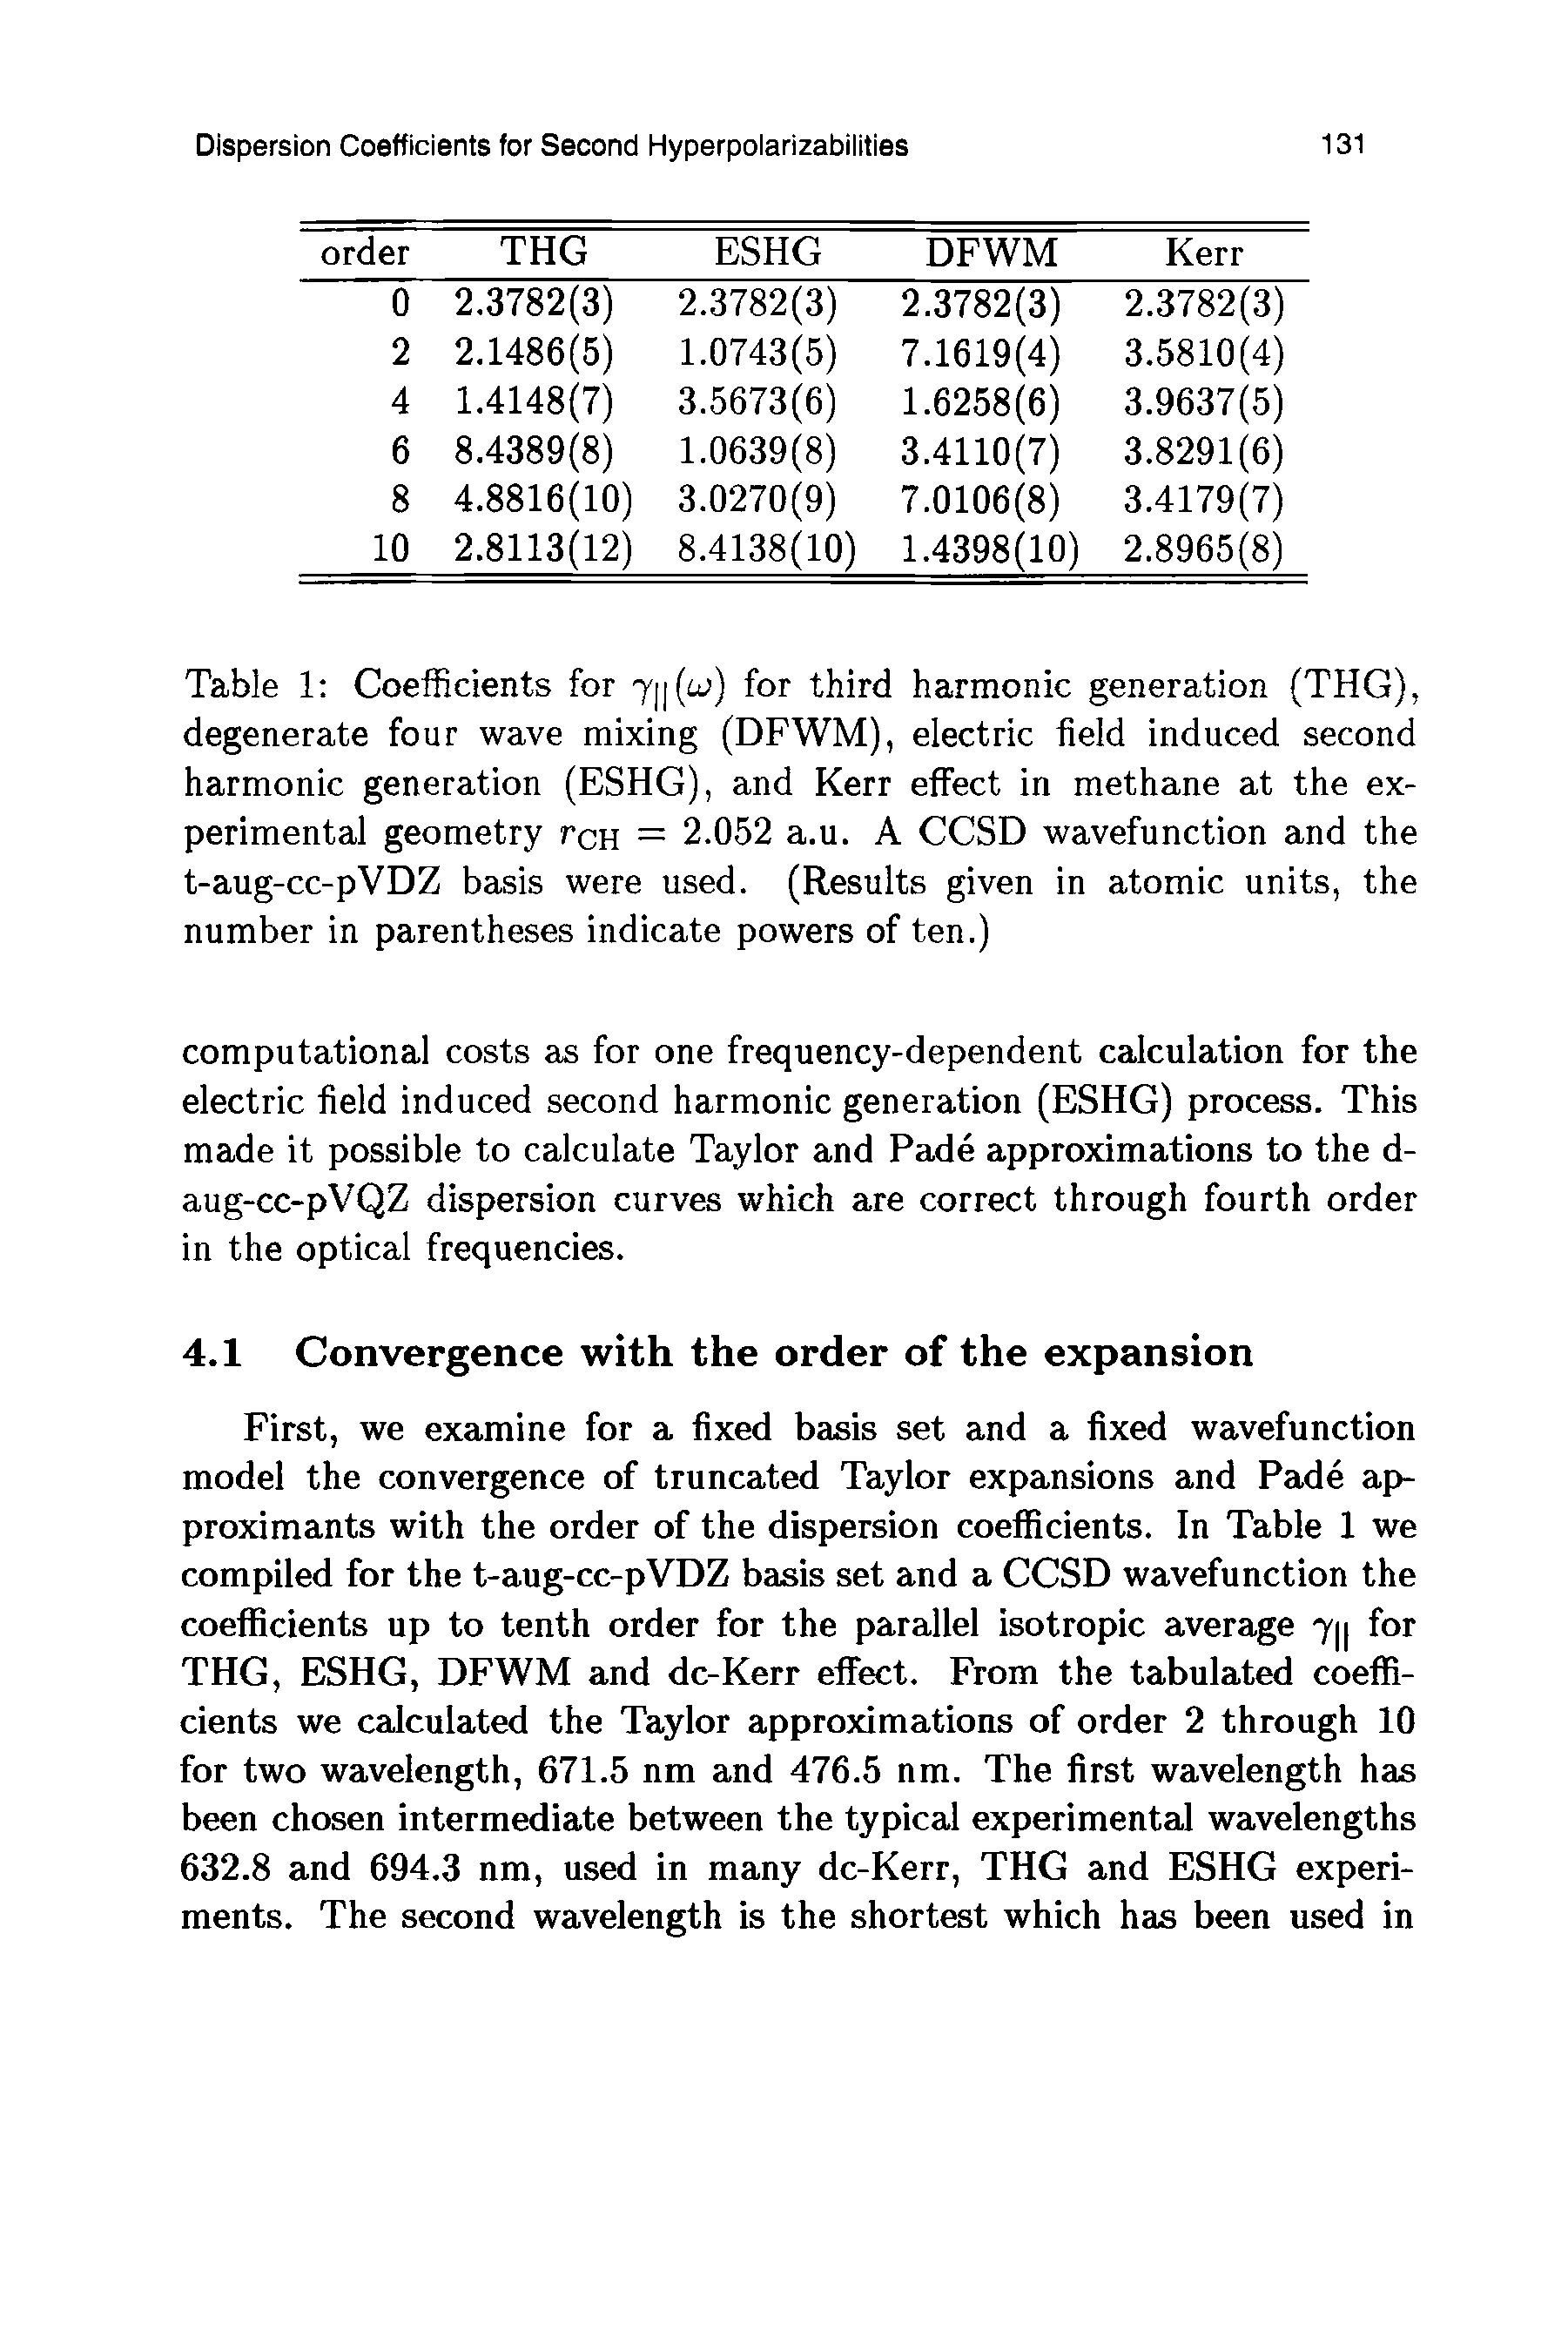 Table 1 Coefficients for 7[ (a ) for third harmonic generation (THG), degenerate four wave mixing (DFWM), electric field induced second harmonic generation (ESHG), and Kerr effect in methane at the experimental geometry rcH = 2.052 a.u. A CCSD wavefunction and the t-aug-cc-pVDZ basis were used. (Results given in atomic units, the number in parentheses indicate powers of ten.)...